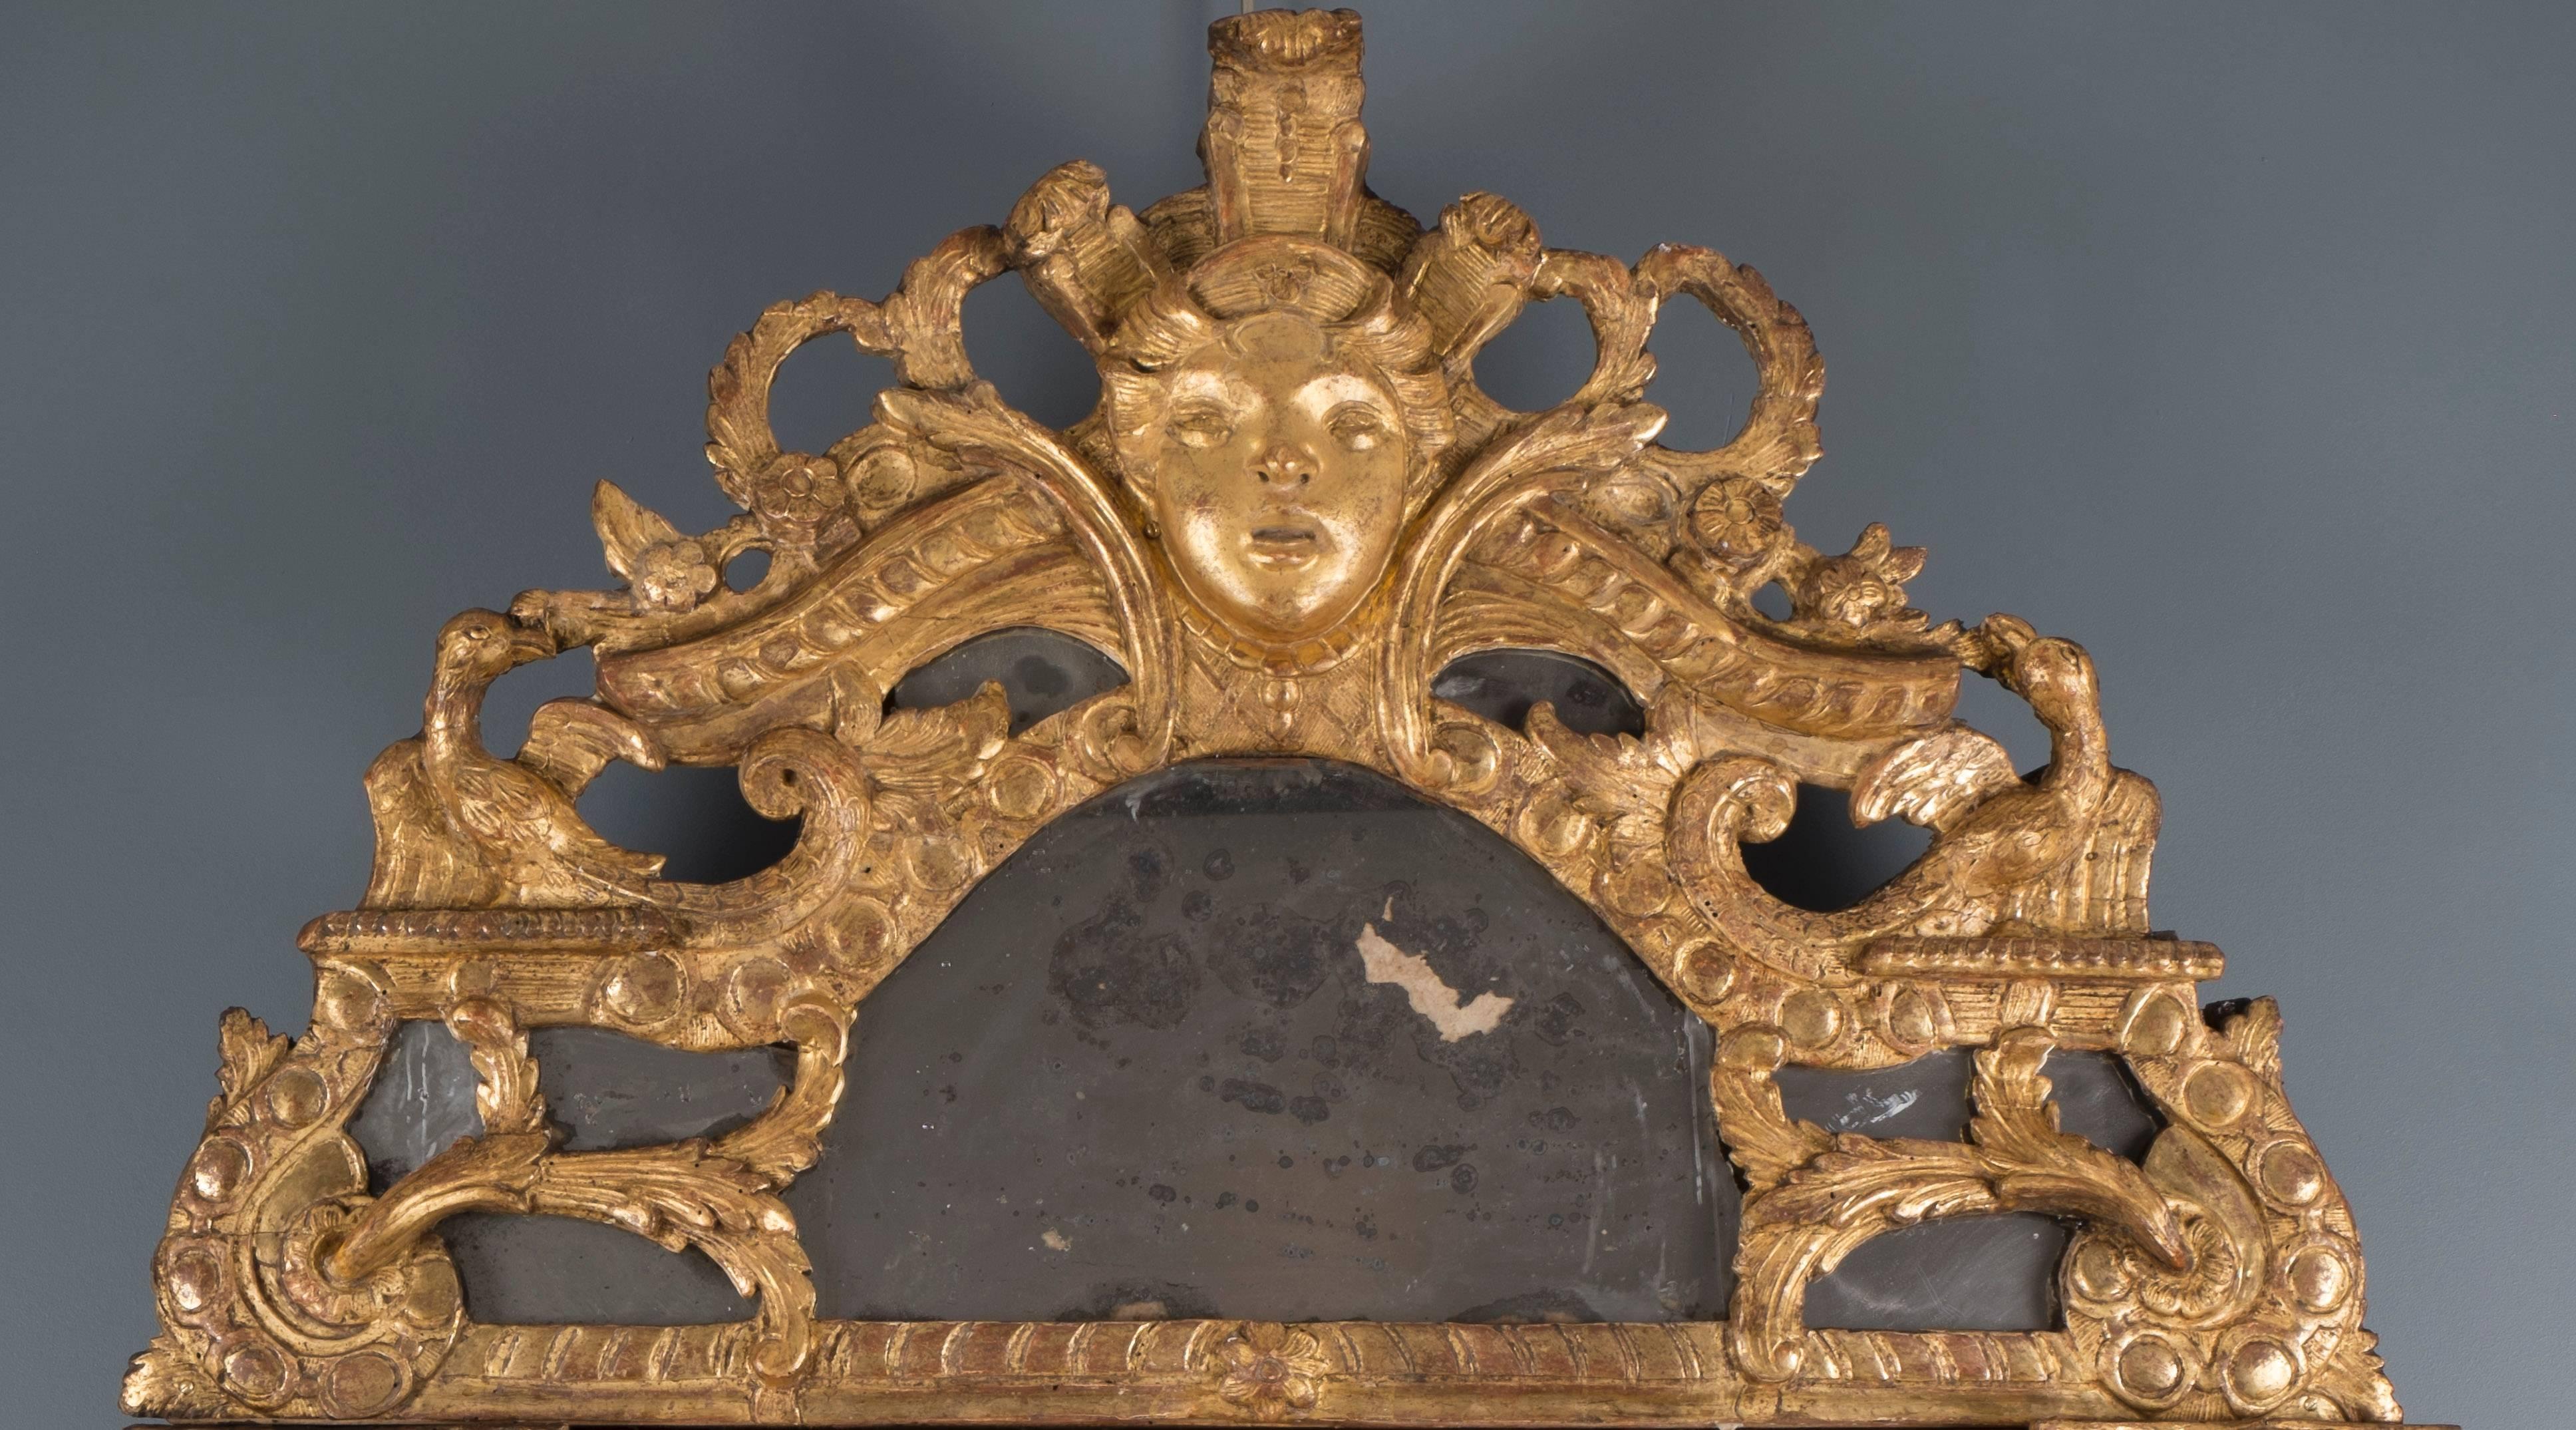 French Regency giltwood mirror with sculpted pediment.
Work from the first half of the 18th century.
Dimensions:
144 cm H x 80 cm L.